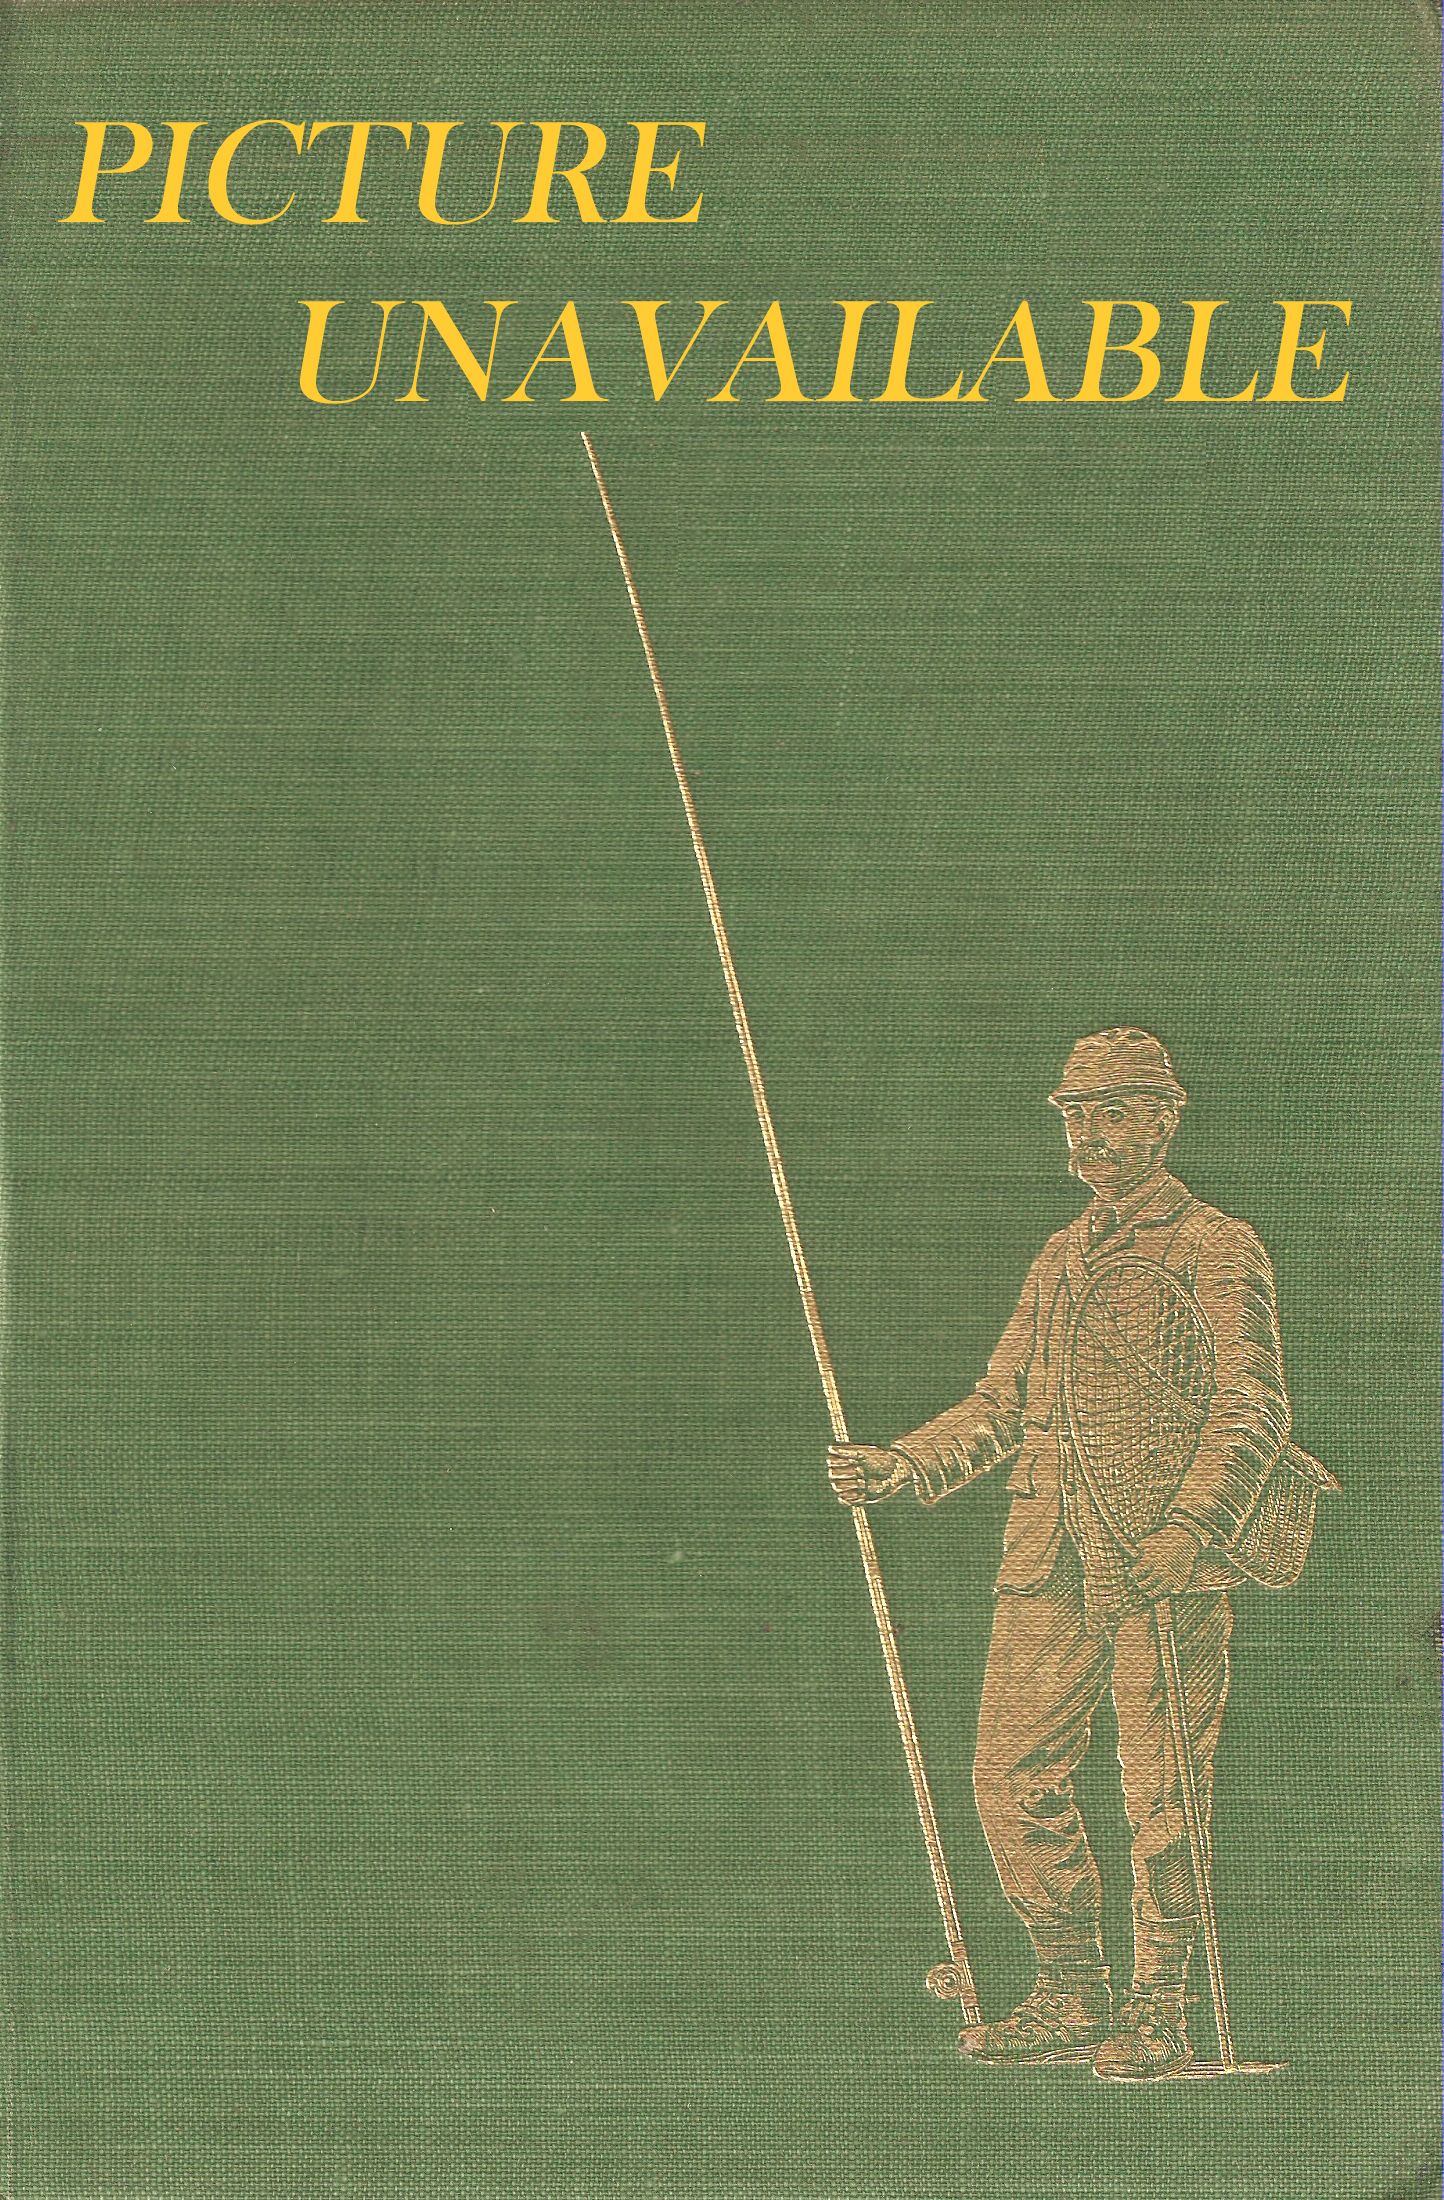 ANGLING. Being the reminiscences of Tom Kenny, giving an account of his  experiences and observations whilst angling and otherwise in East Kent  since 1933. By Tom Kenny.